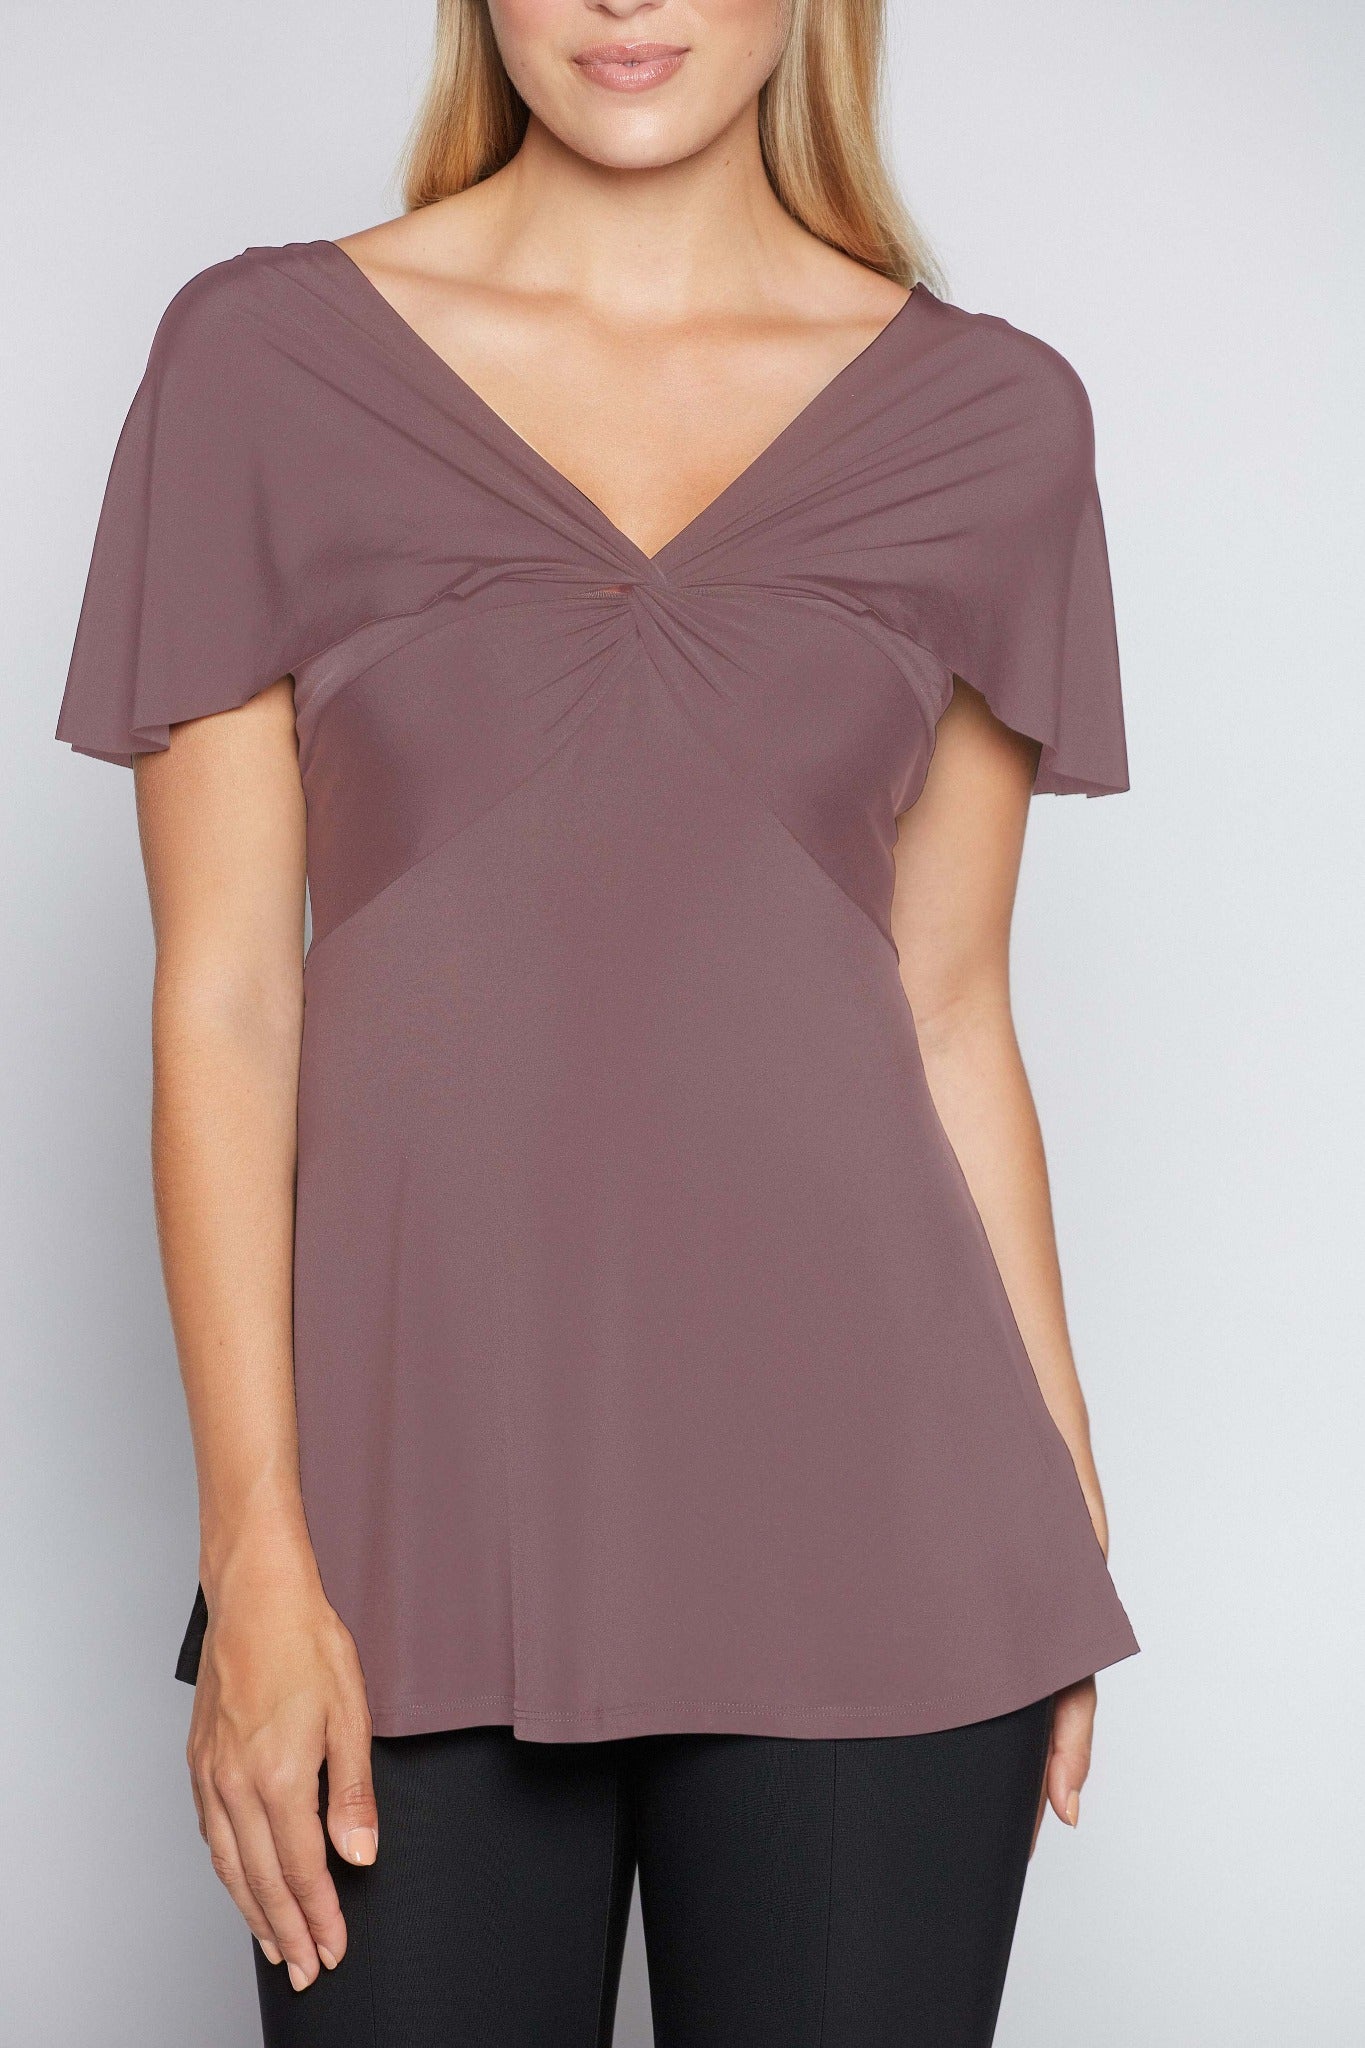 Woman wearing a fuller bust low cut v-neck top with a butterfly twist detail at the empire waist in quartz stretch viscose jersey by Miriam Baker.